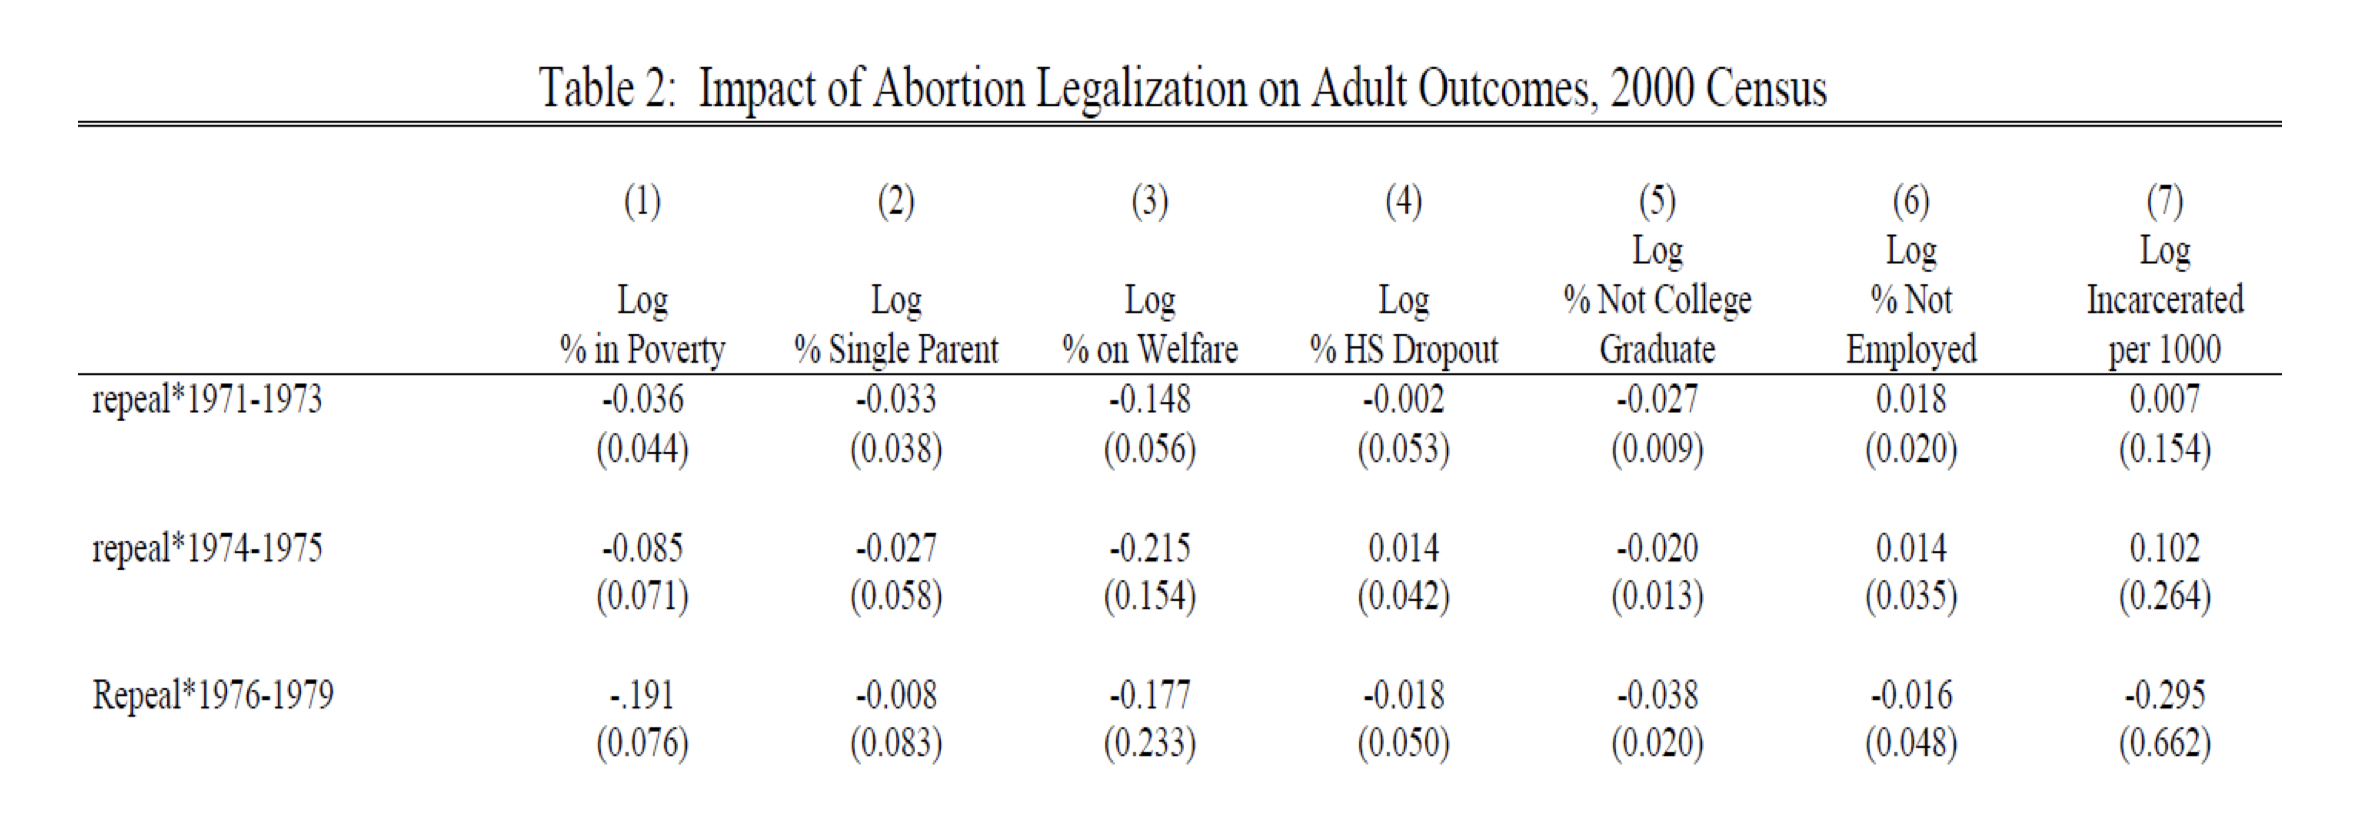 02 impact abortion legalization adult outcomes 2